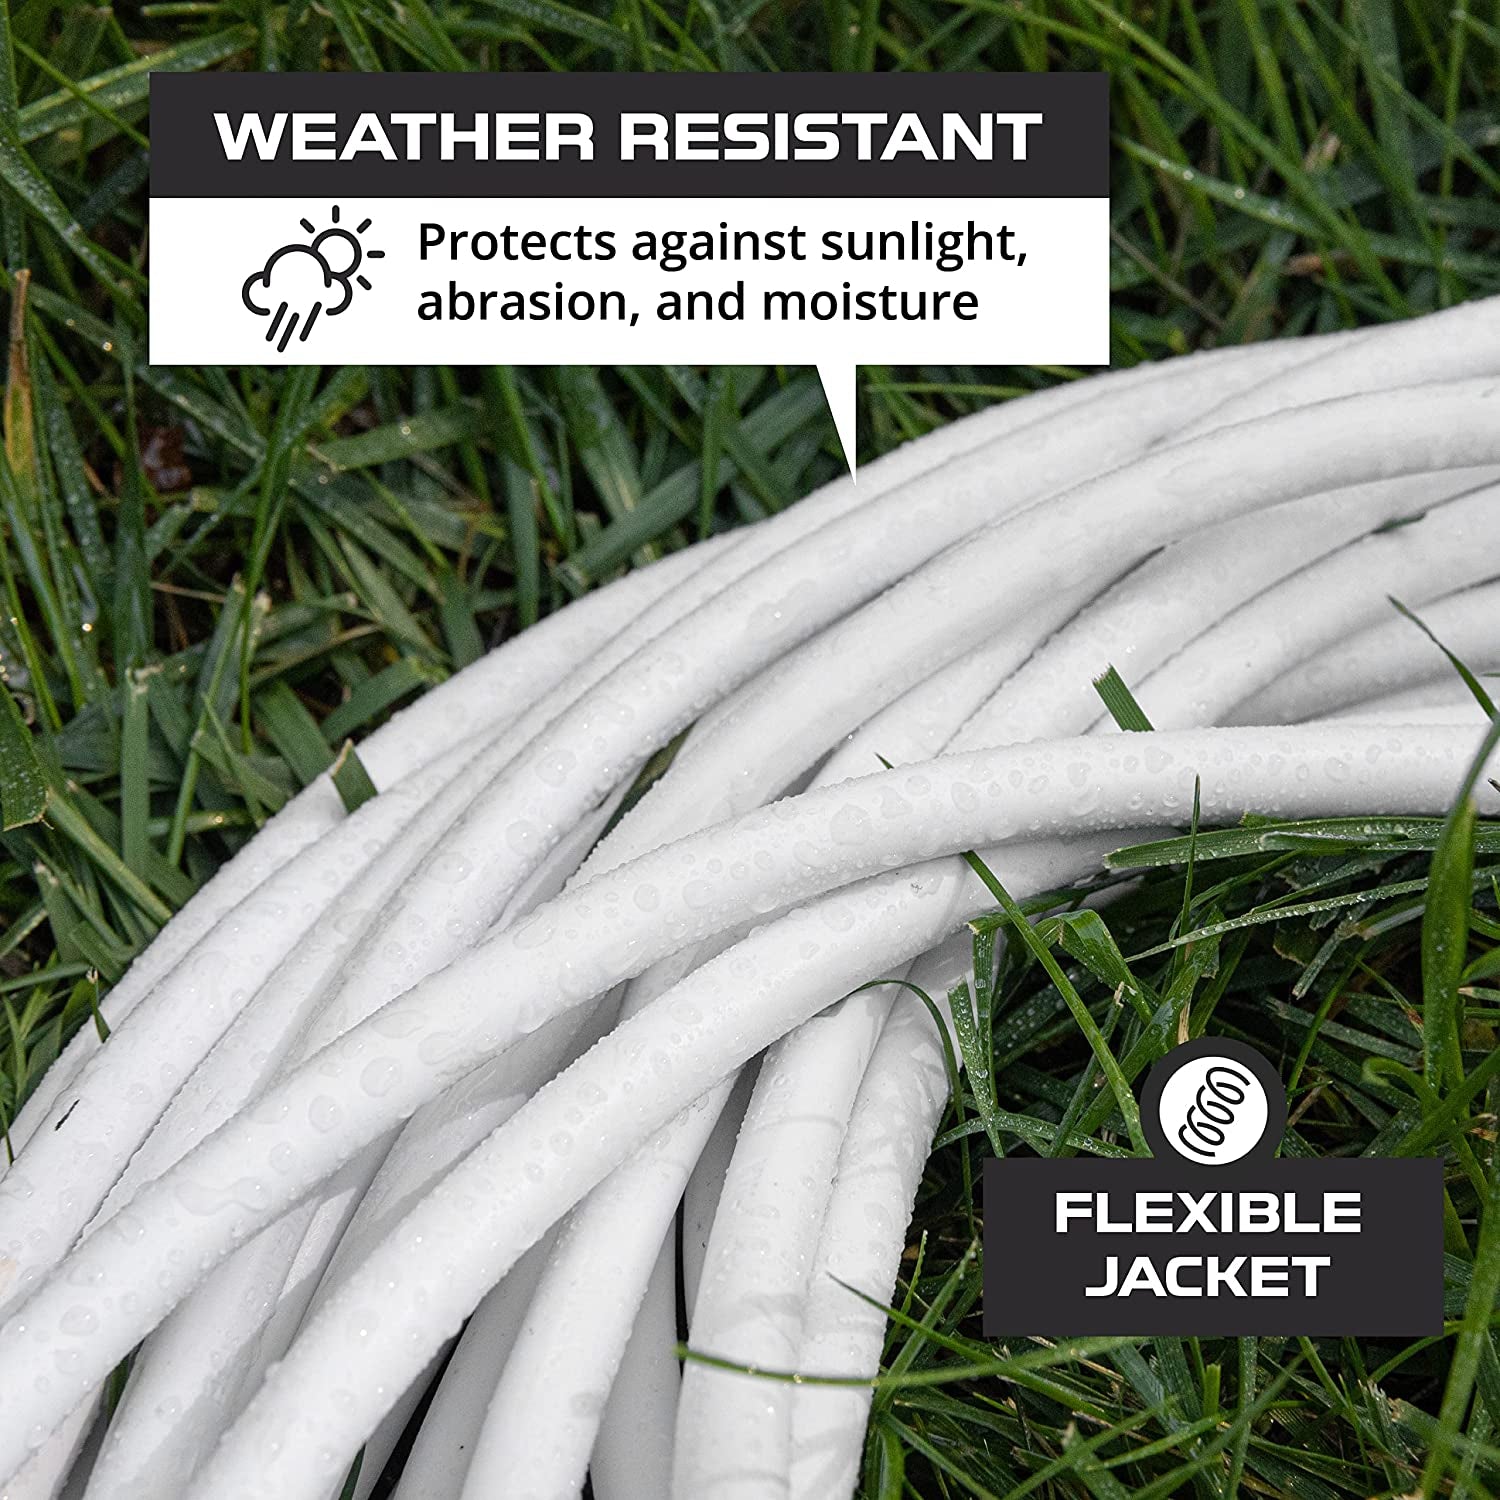 15 Ft White Extension Cord - 16/3 SJTW Durable Electrical Cable